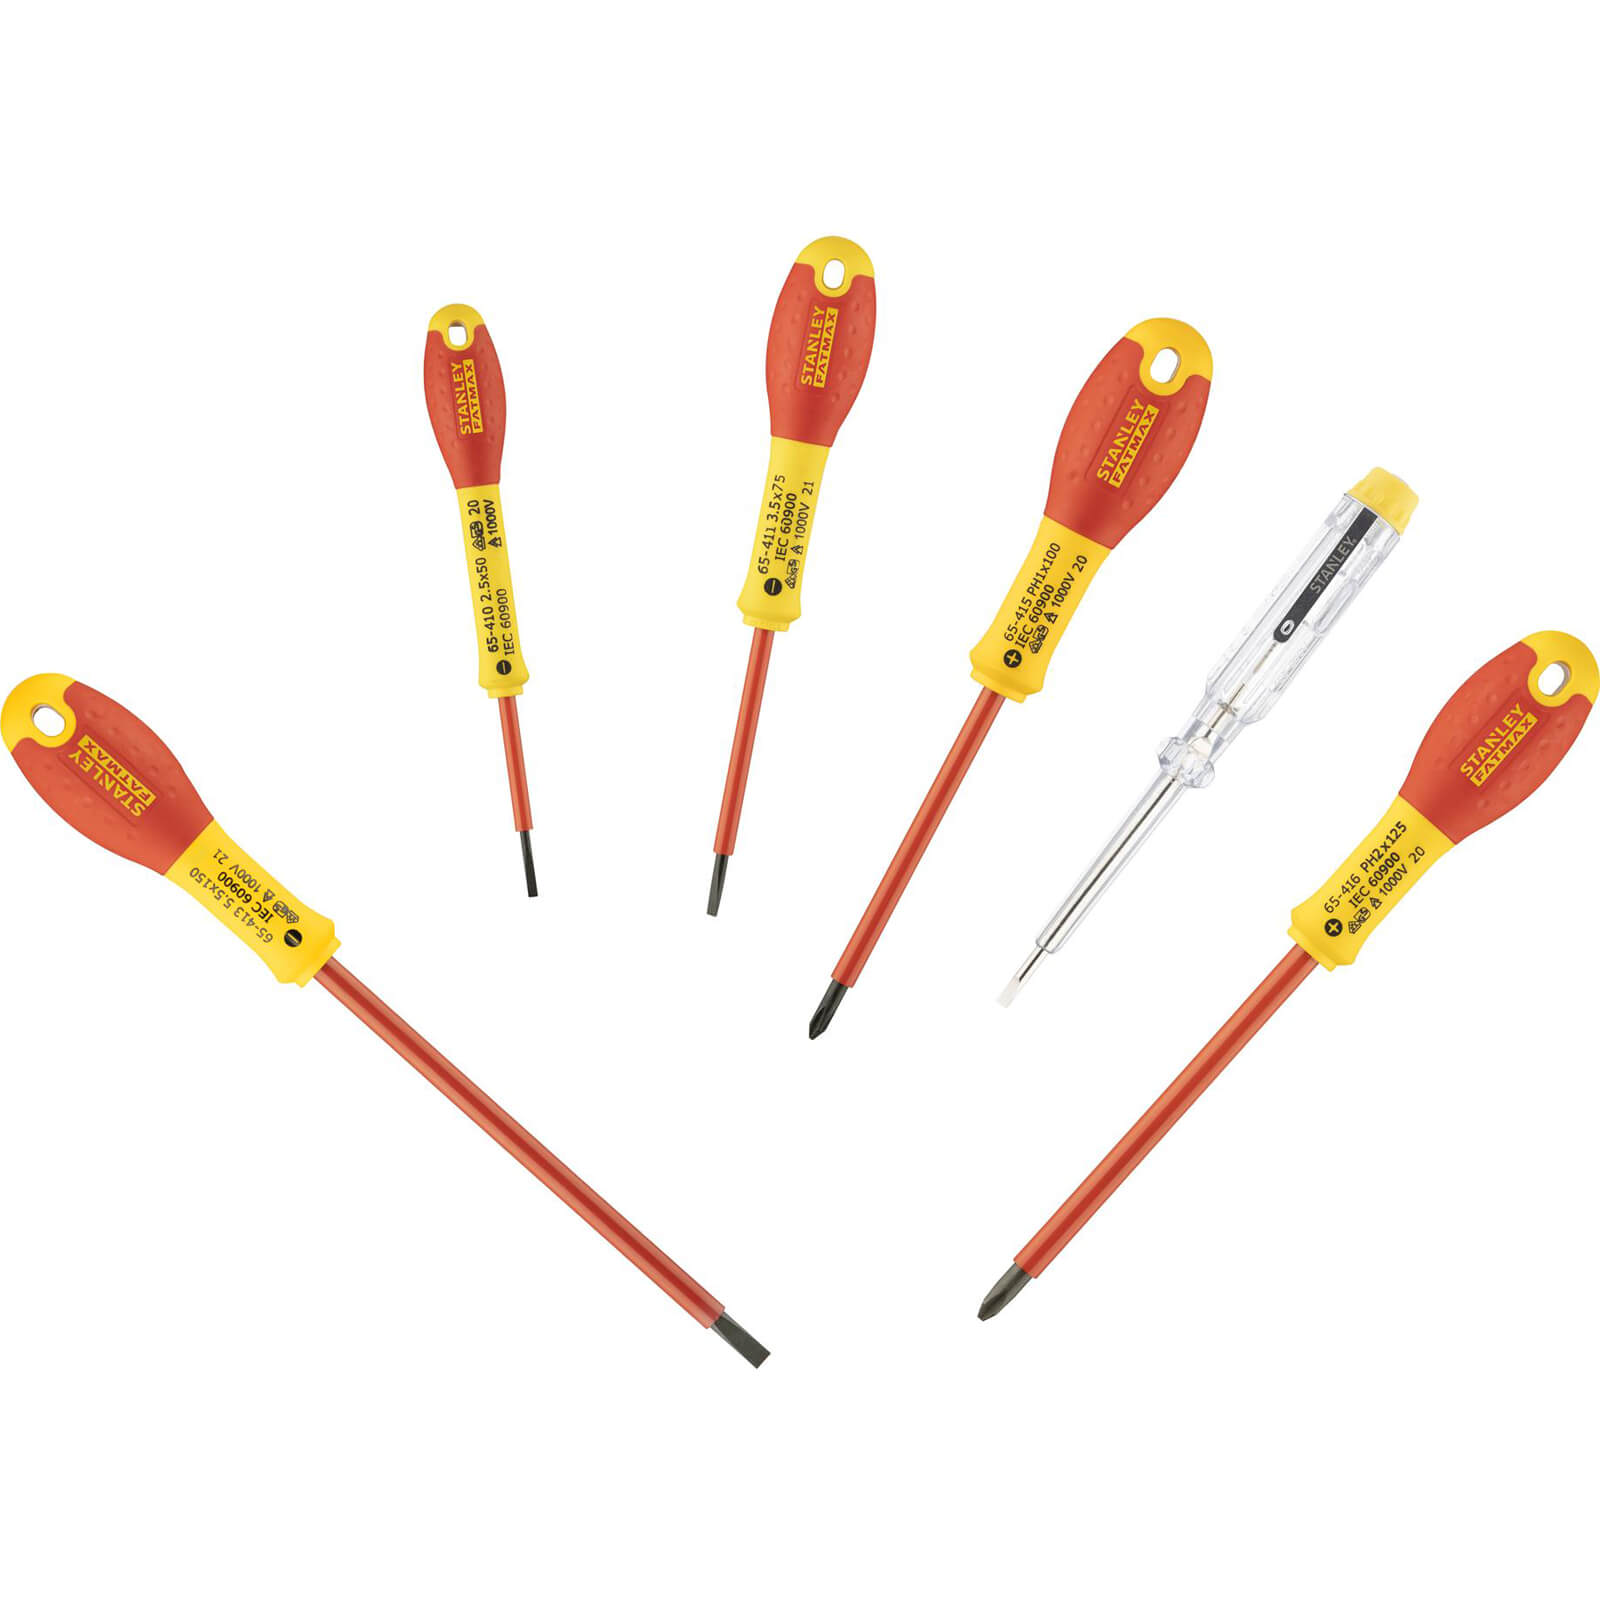 Photo of Stanley 6 Piece Fatmax Vde Insulated Screwdriver Set